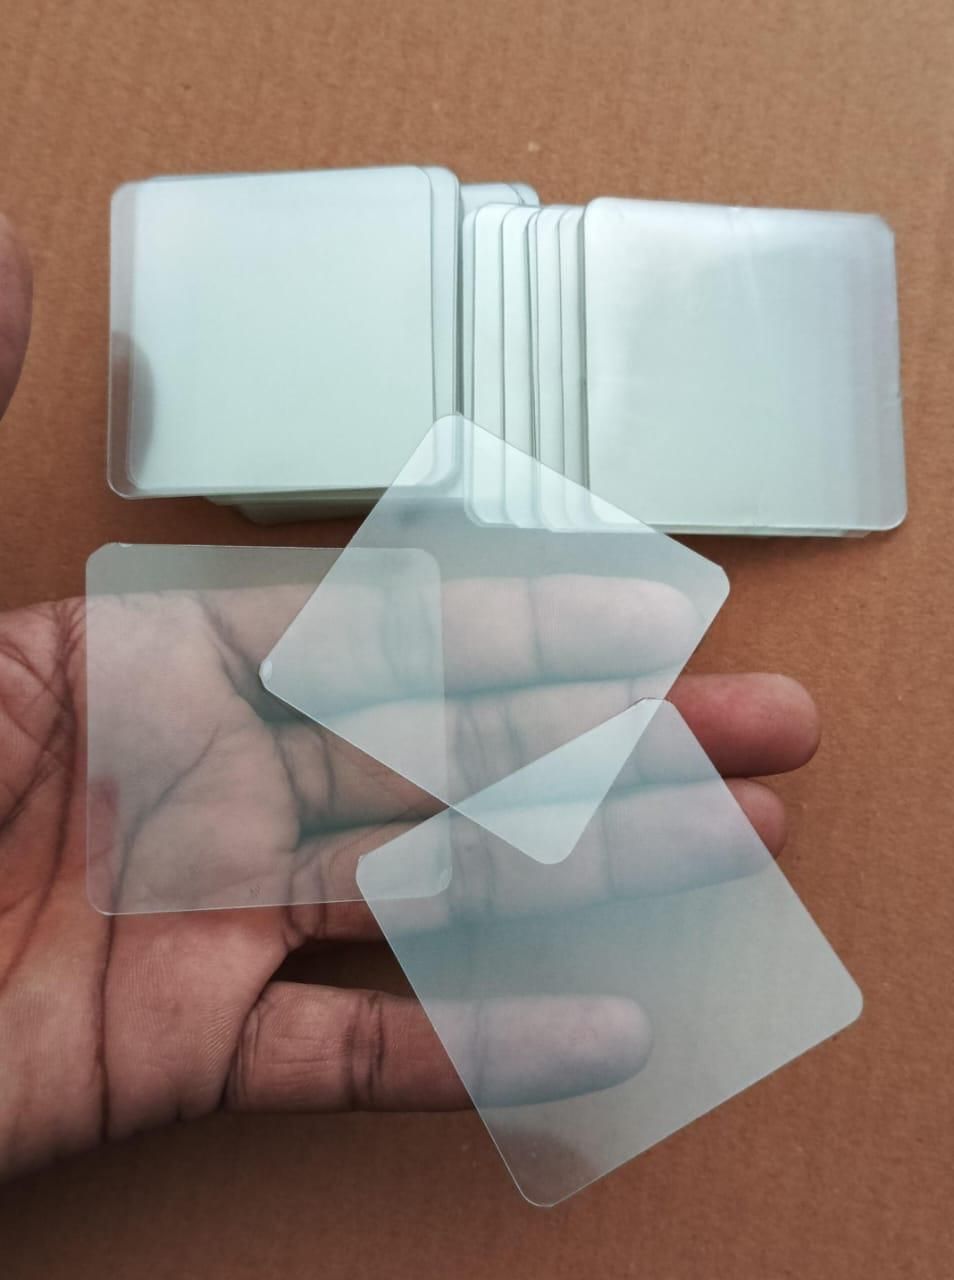 Double Sided Adhesive Pads, Two Sided Pre-Cut Square Tape (40PCS)